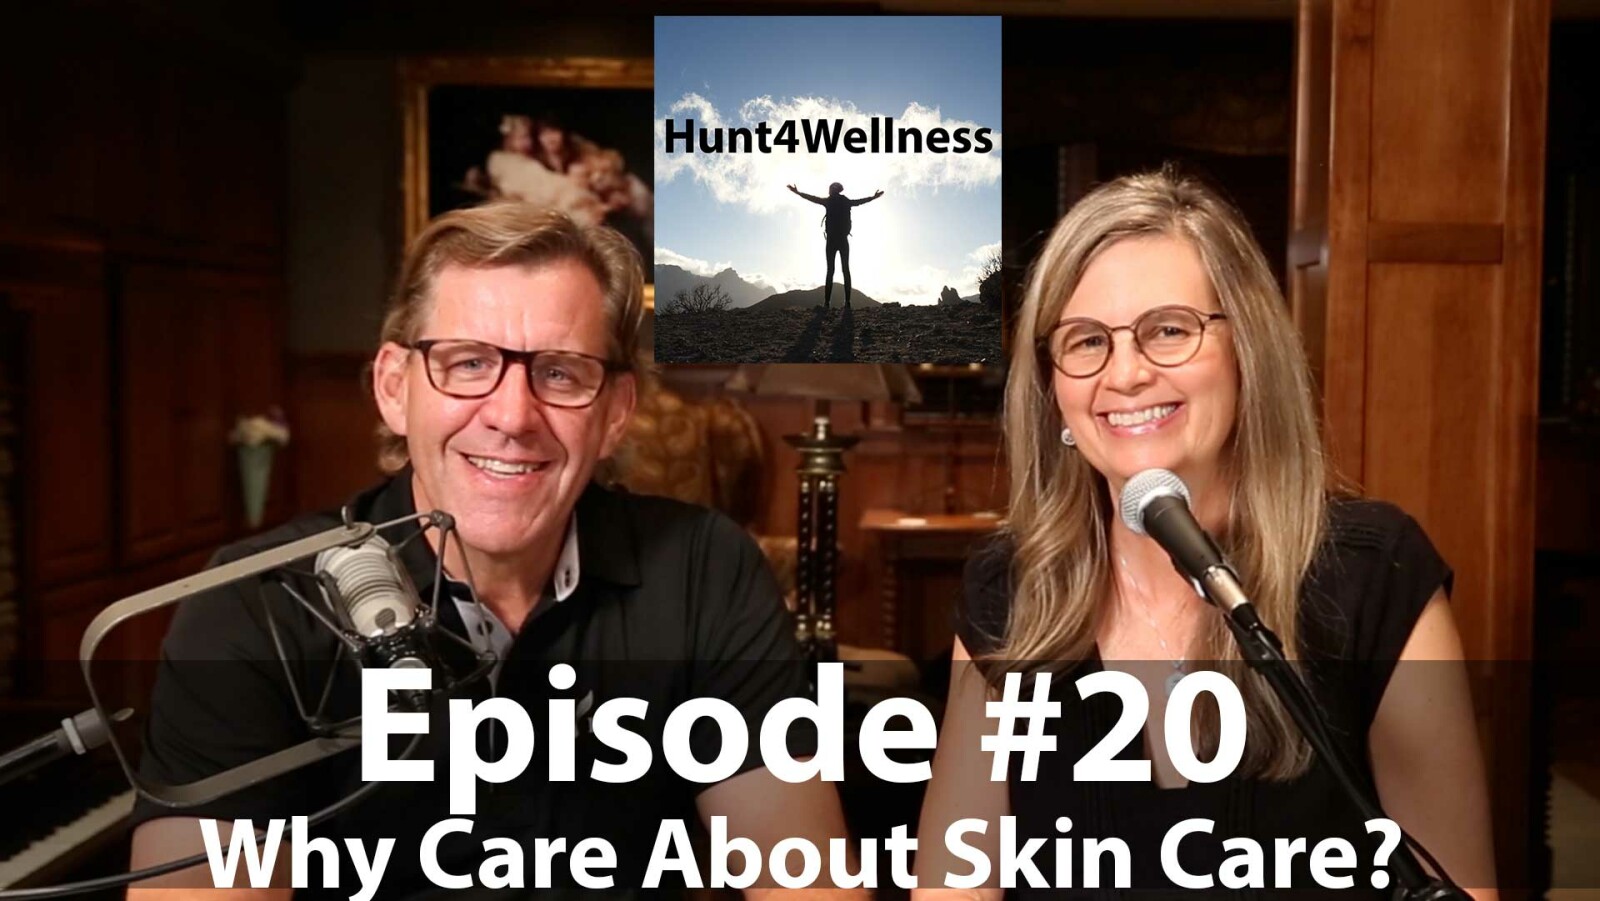 Episode #20 - Why Care About Skin Care?